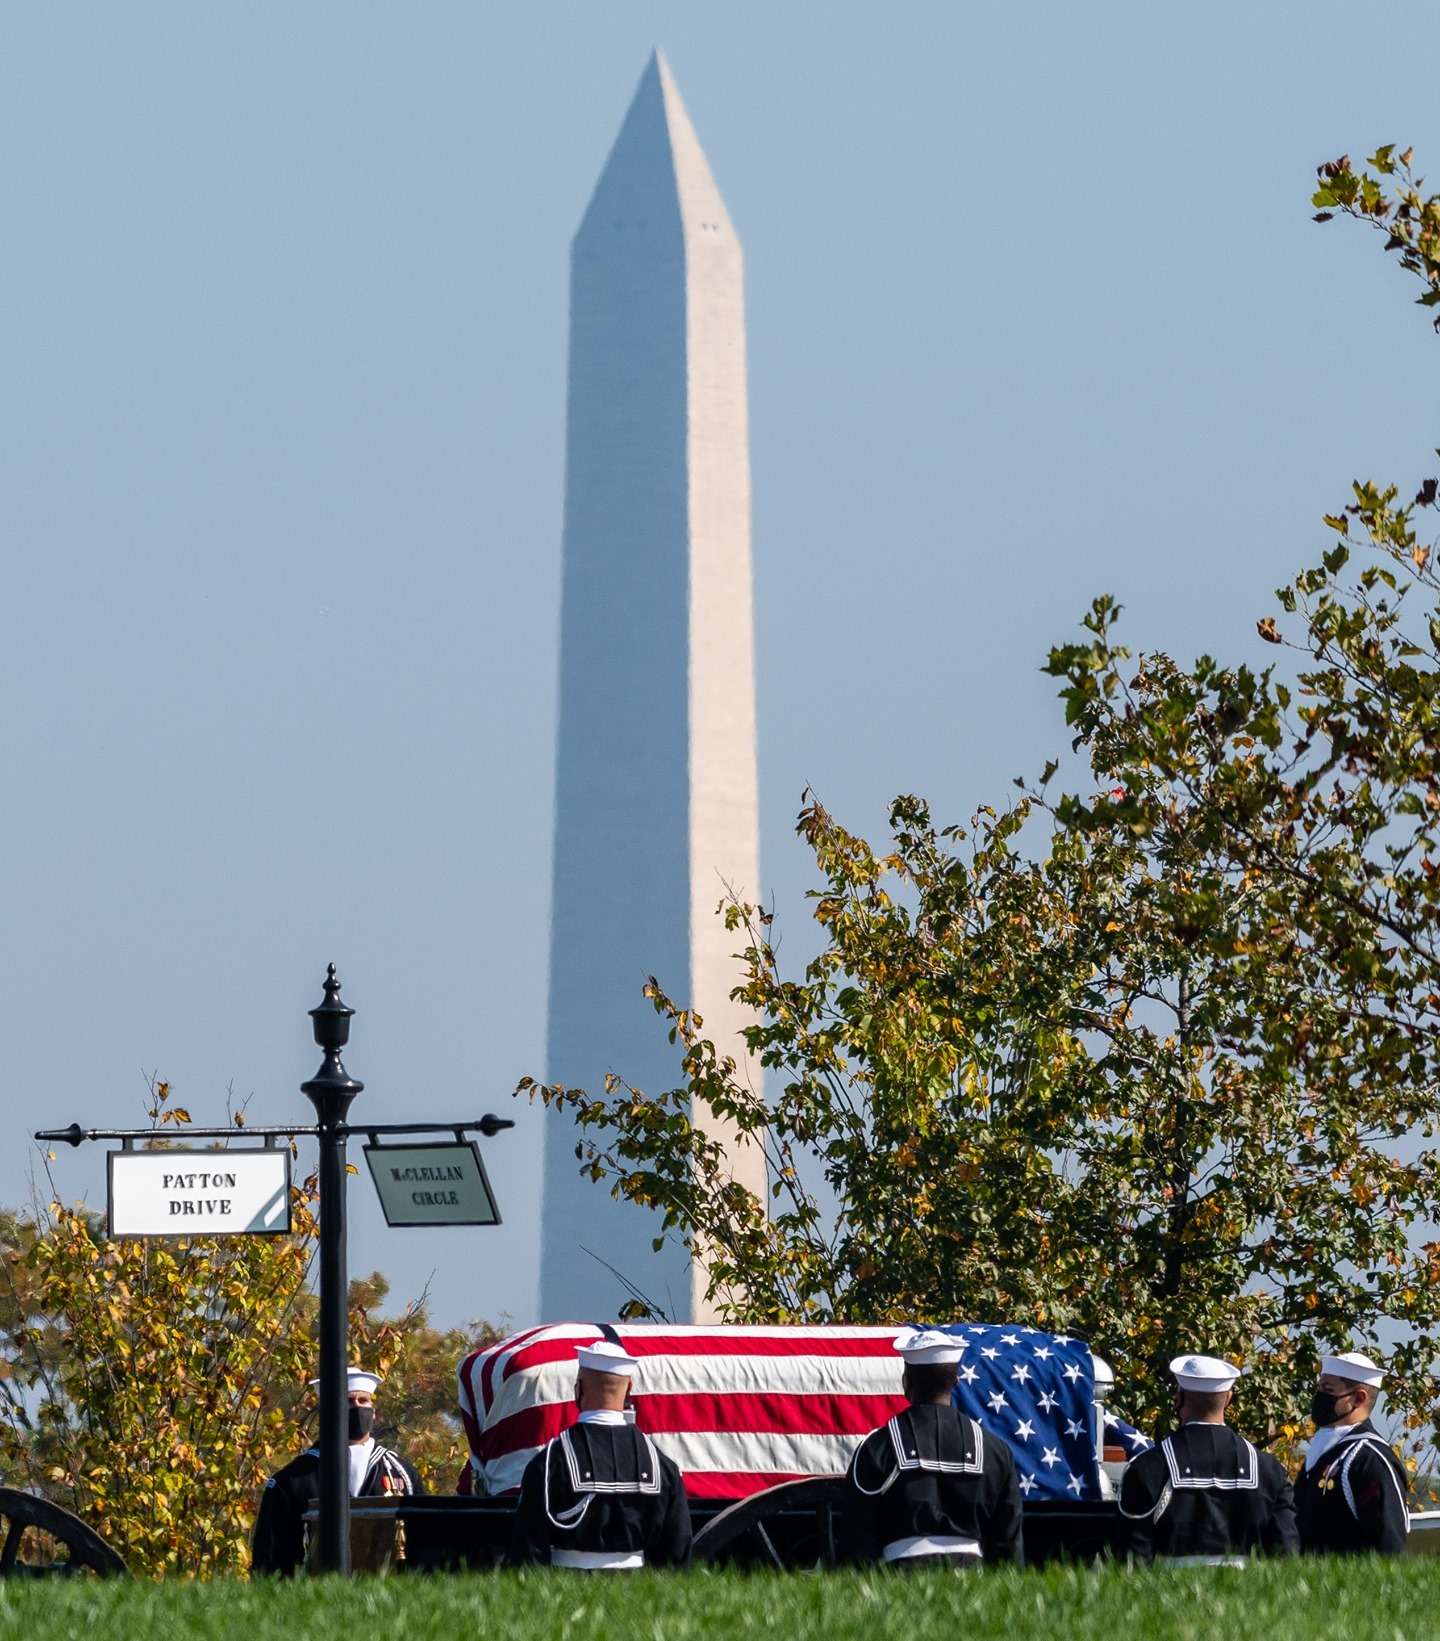 The Washington Monument rises over a caisson at Arlington National Cemetery escorting the remains of a veteran to their final resting place.

George Washington's military and political leadership were indispensable to the founding of the United States. As commander of the Continental Army, he rallied Americans from thirteen divergent states and outlasted Britain's superior military force. As the first president, Washington's superb leadership set the standard for each president that has succeeded him. The Washington Monument towers above the city that bears his name, serving as an awe-inspiring reminder of George Washington's greatness. The monument, like the man, stands in no one's shadow.

The Washington Monument, designed by Robert Mills and eventually completed by Thomas Casey and the U.S. Army Corps of Engineers, honors and memorializes George Washington at the center of the nation's capital. The structure was completed in two phases of construction, one private (1848-1854) and one public (1876-1884). Built in the shape of an Egyptian obelisk, evoking the timelessness of ancient civilizations, the Washington Monument embodies the awe, respect, and gratitude the nation felt for its most essential Founding Father. When completed, the Washington Monument was the tallest building in the world at 555 feet, 5-1/8 inches.